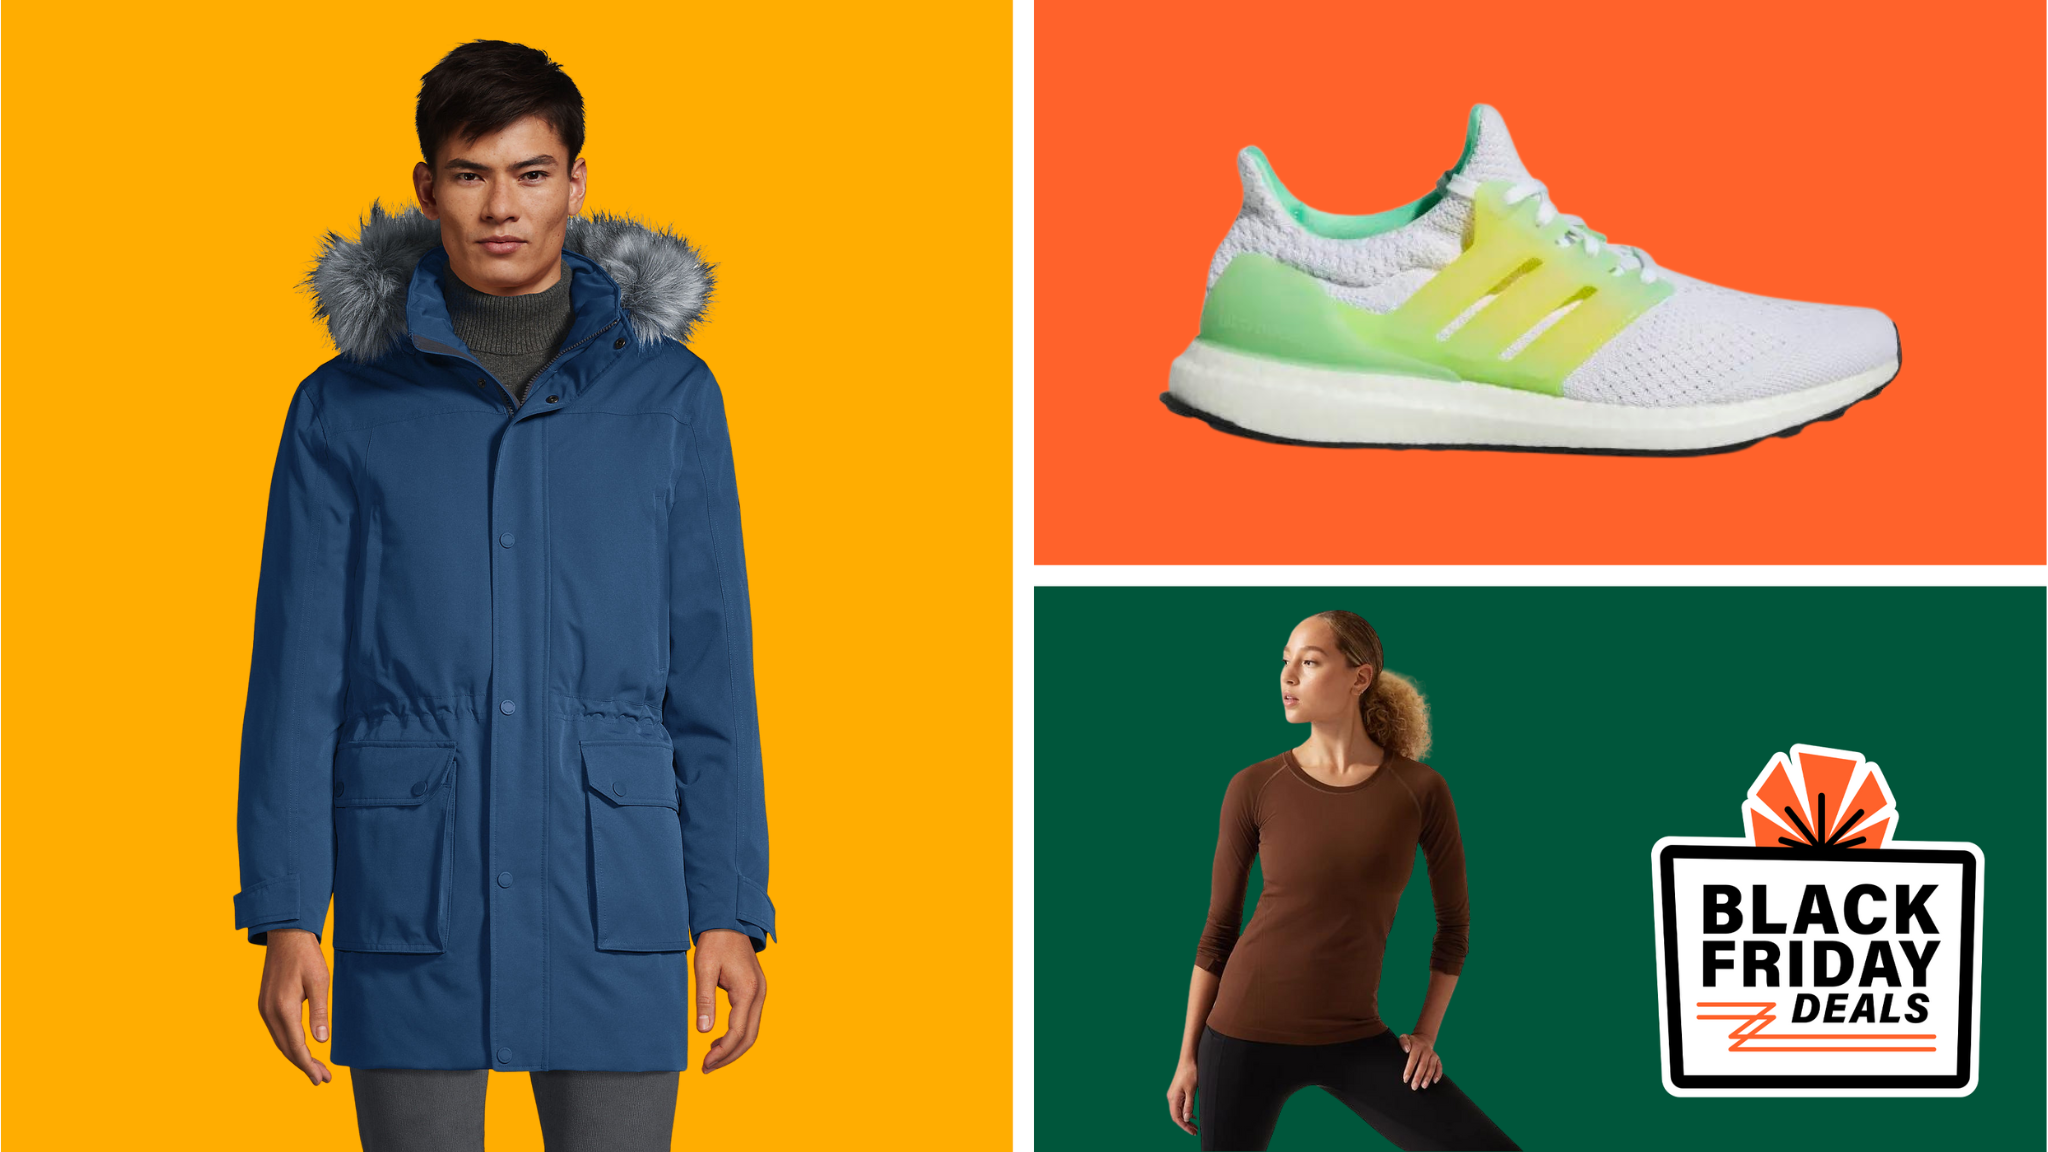 Black Friday style sales: Save on Adidas, Lands' End and